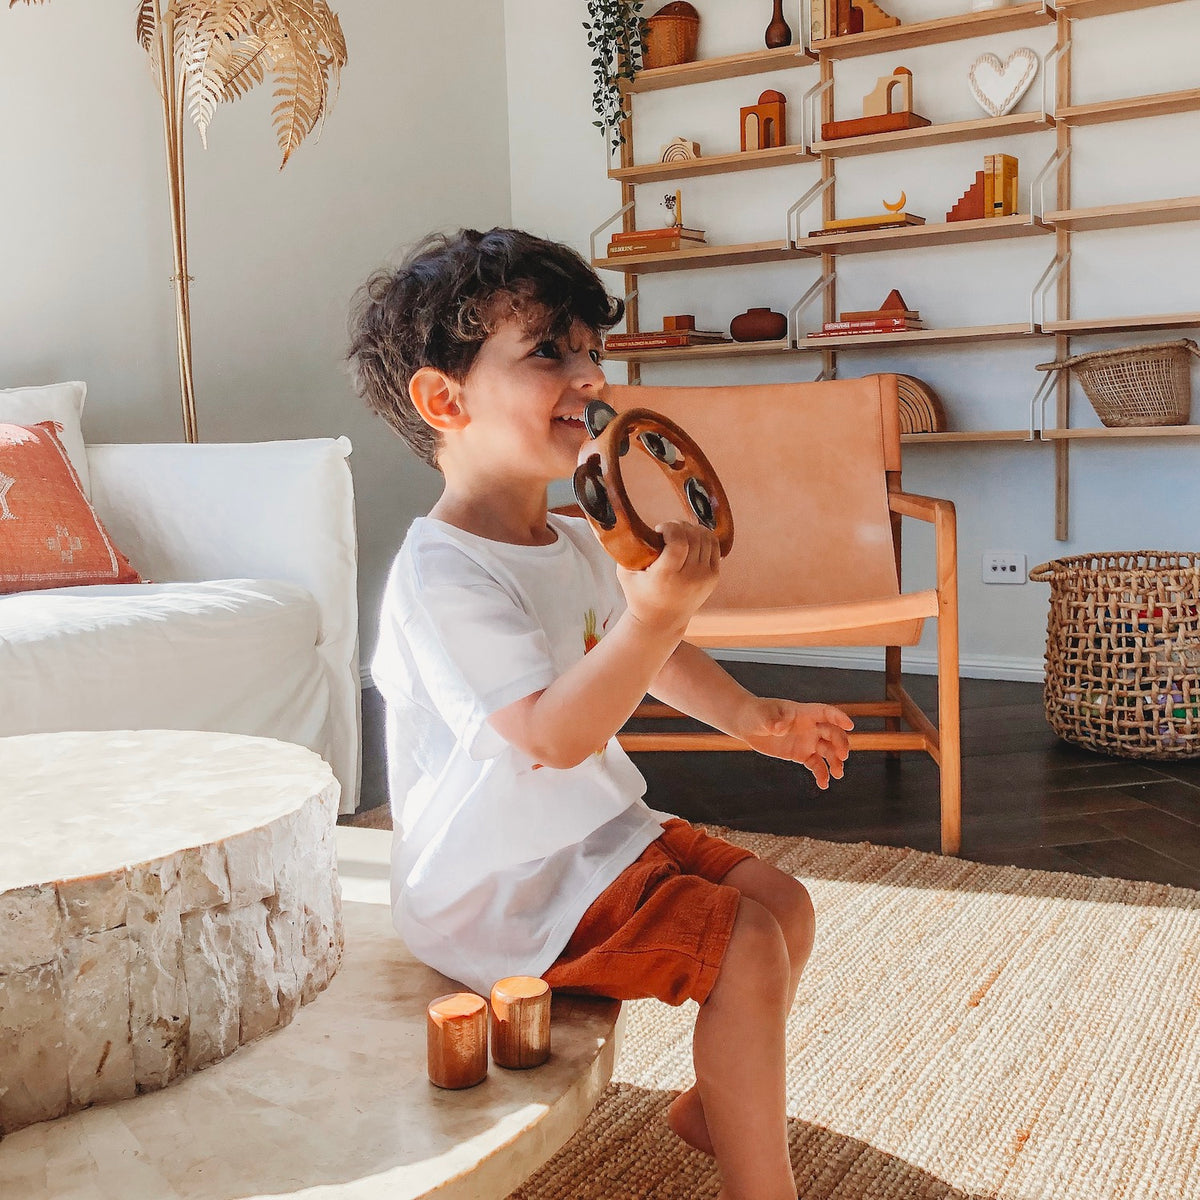 an image of a smiling child with dark hair sitting on a natural table top playing a wooden tambourine instruments for kids